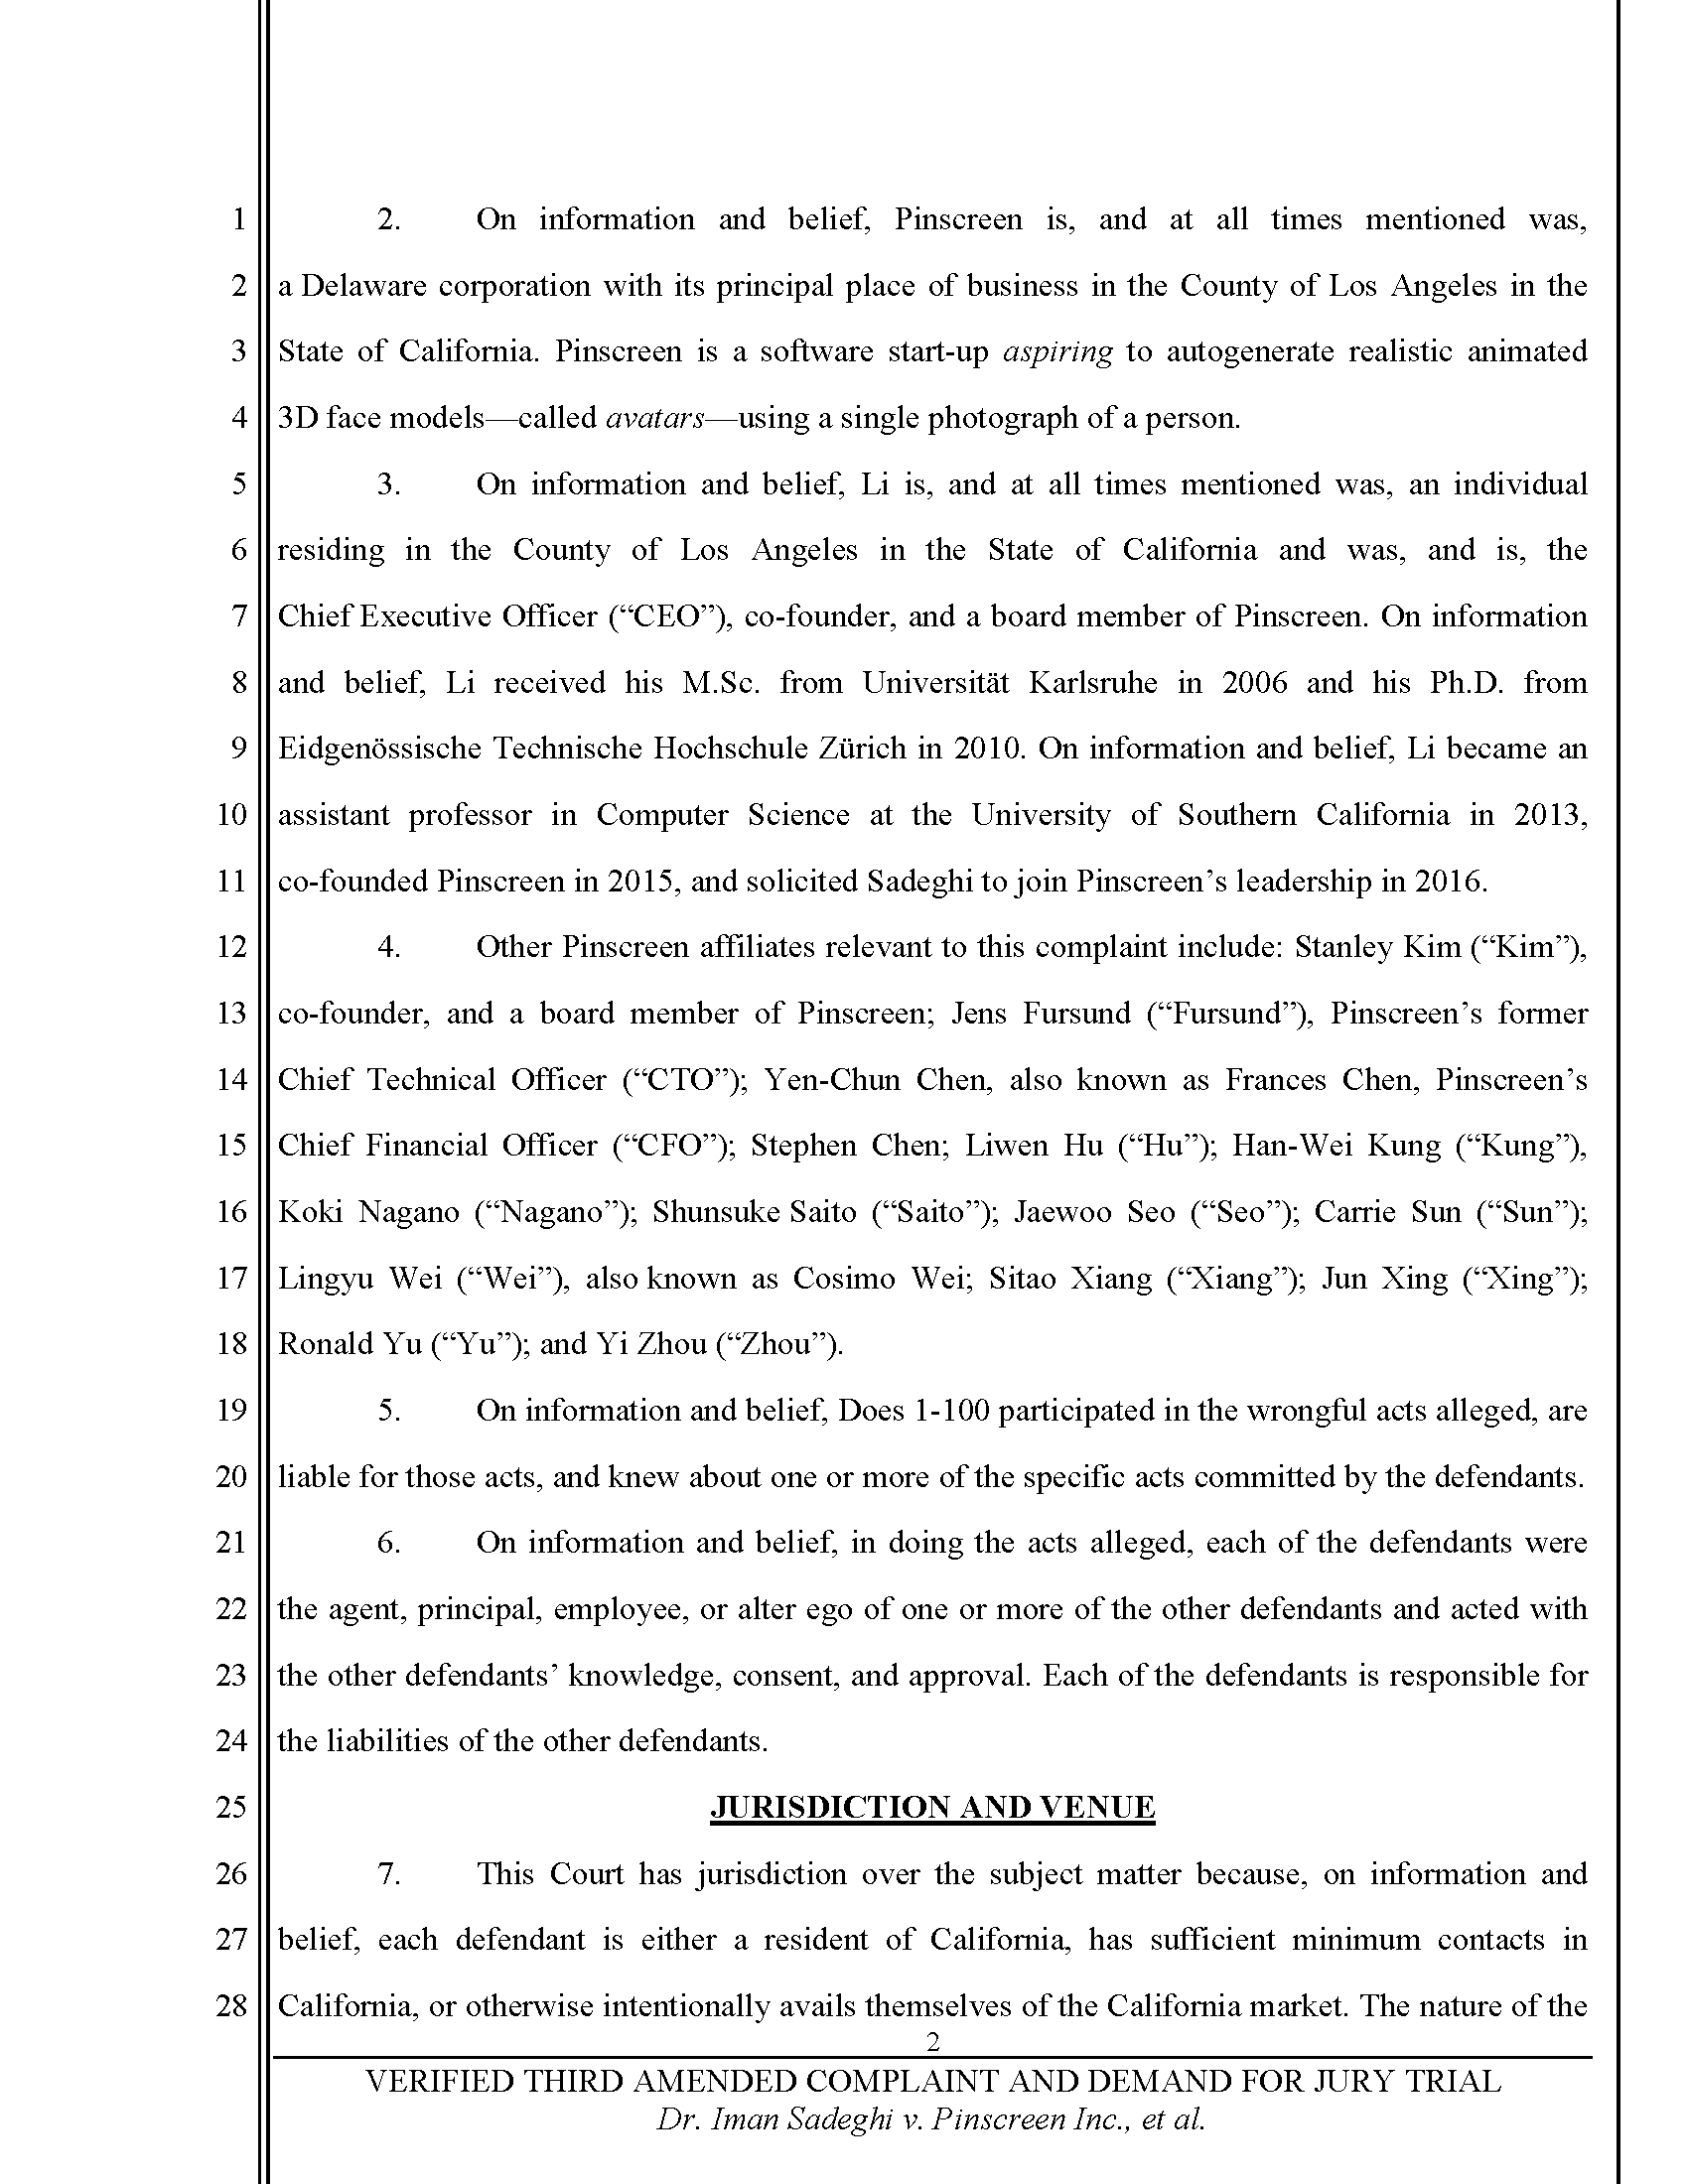 Third Amended Complaint (TAC) Page 3